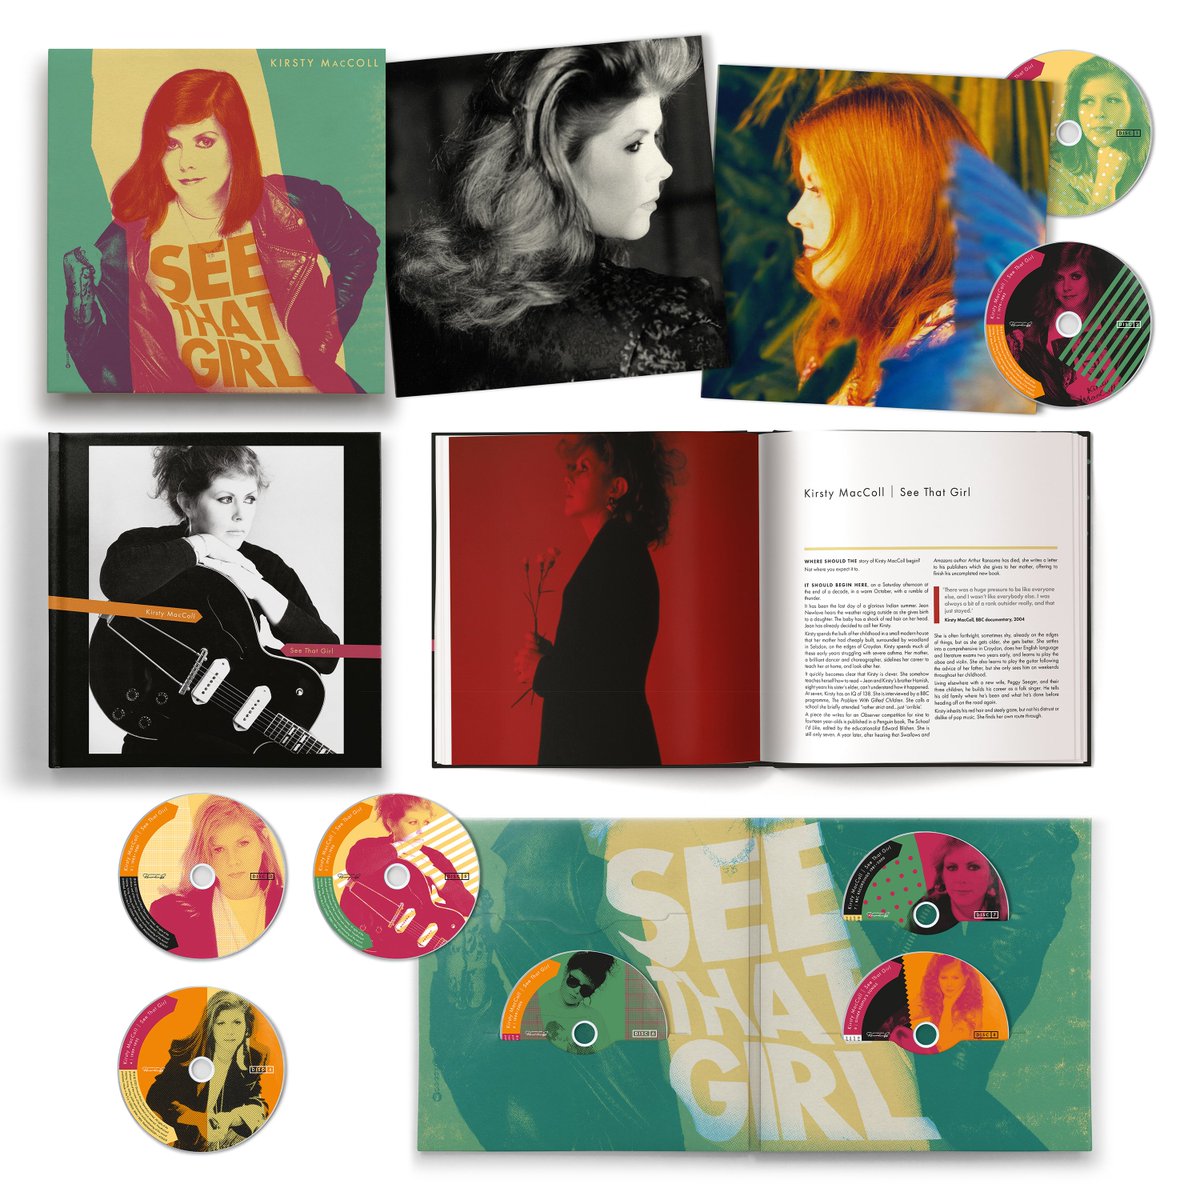 ‘See That Girl’ 1979-2000, the new 8CD Box Set from Kirsty MacColl is available to pre-order now. kirstymaccoll.lnk.to/SeeThatGirl You can listen to three tracks from the upcoming release already, including Eu Só Quero Un Xodó kirstymaccoll.lnk.to/streaming #stiffrecords #kirstymaccoll